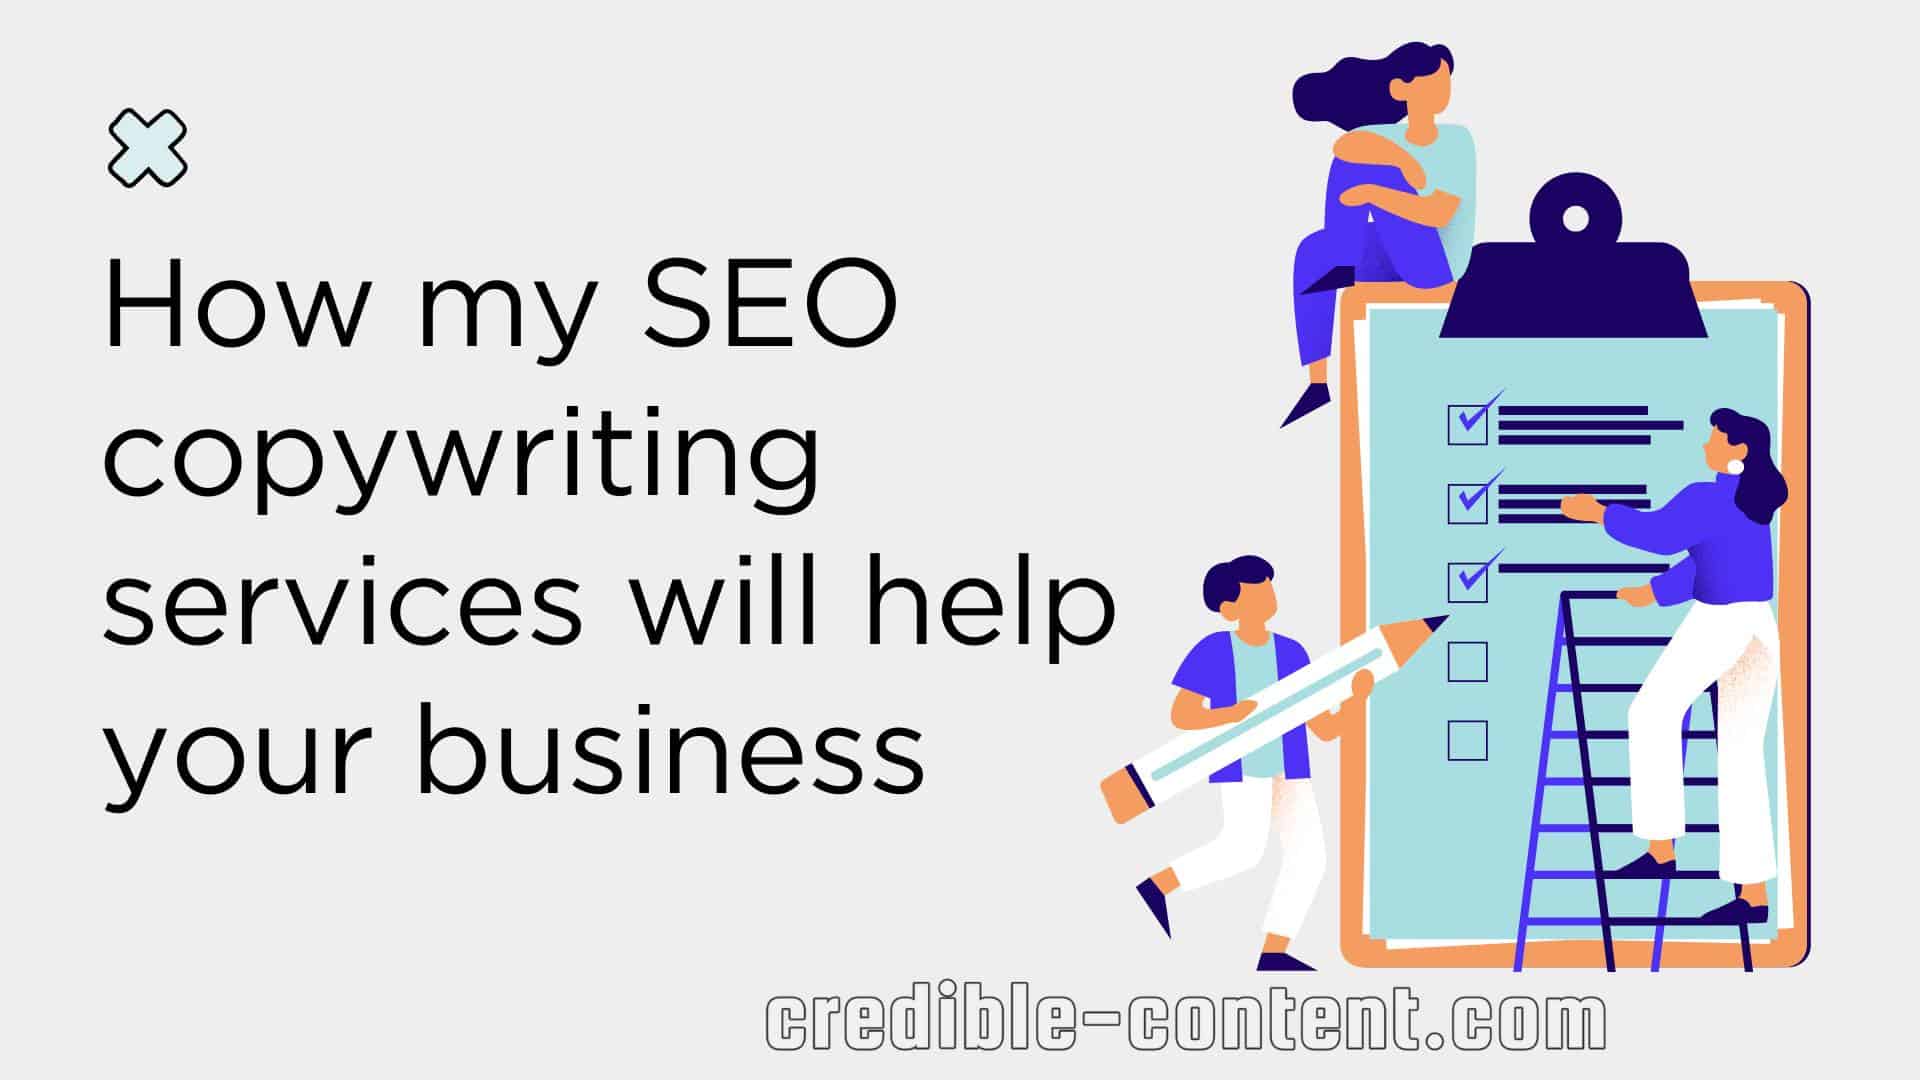 How my SEO copywriting services will help your business